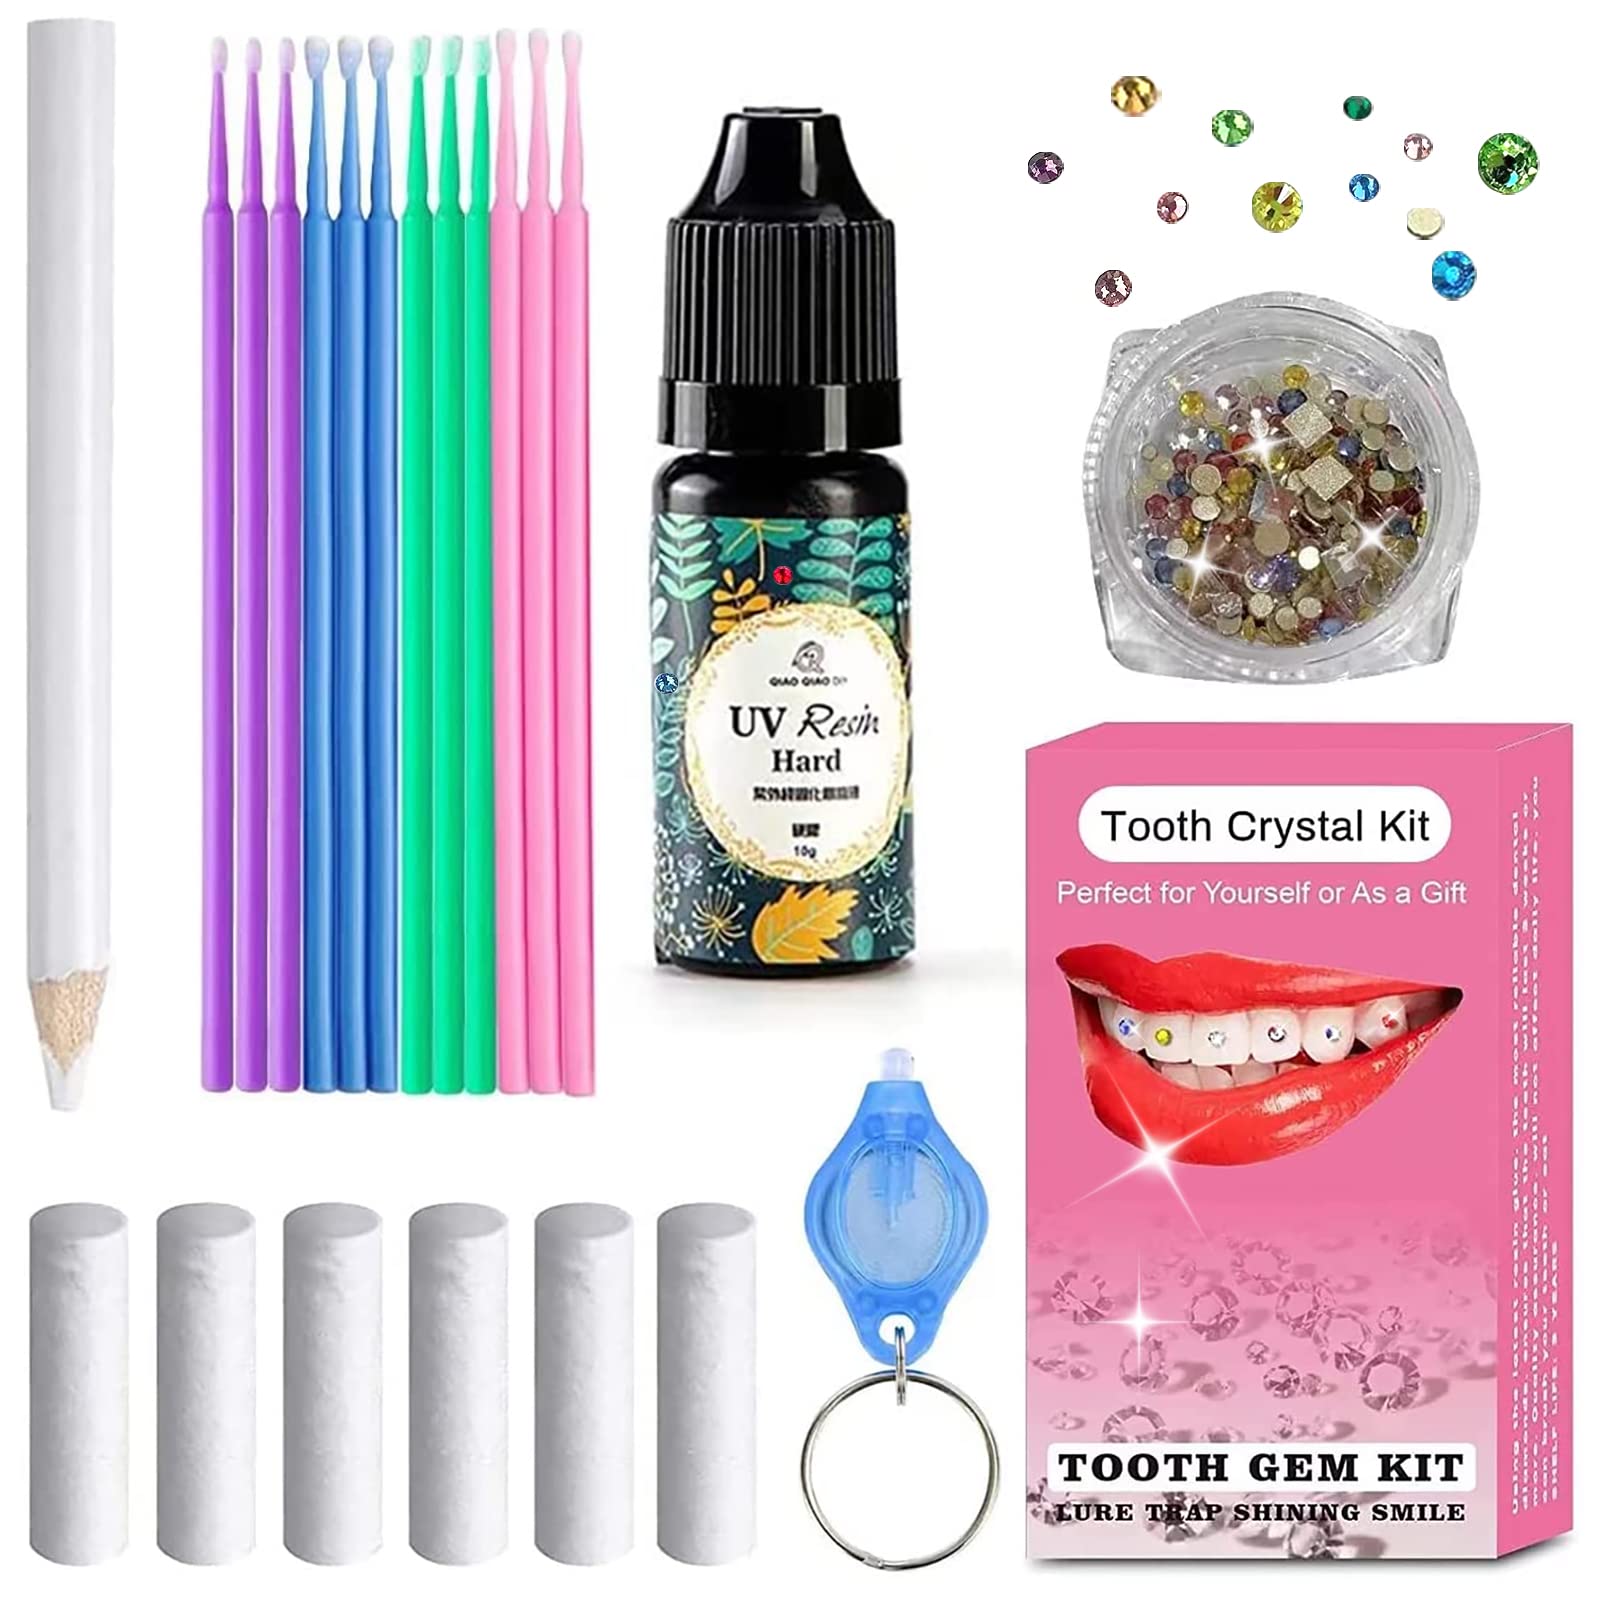 Tooth Jewelry Kit,Clear Crystals Teeth Gems Kit With Glue And Light -  Crystals Jewelry Starter Kit Teeth Gems For Reflective Tooth Adornment